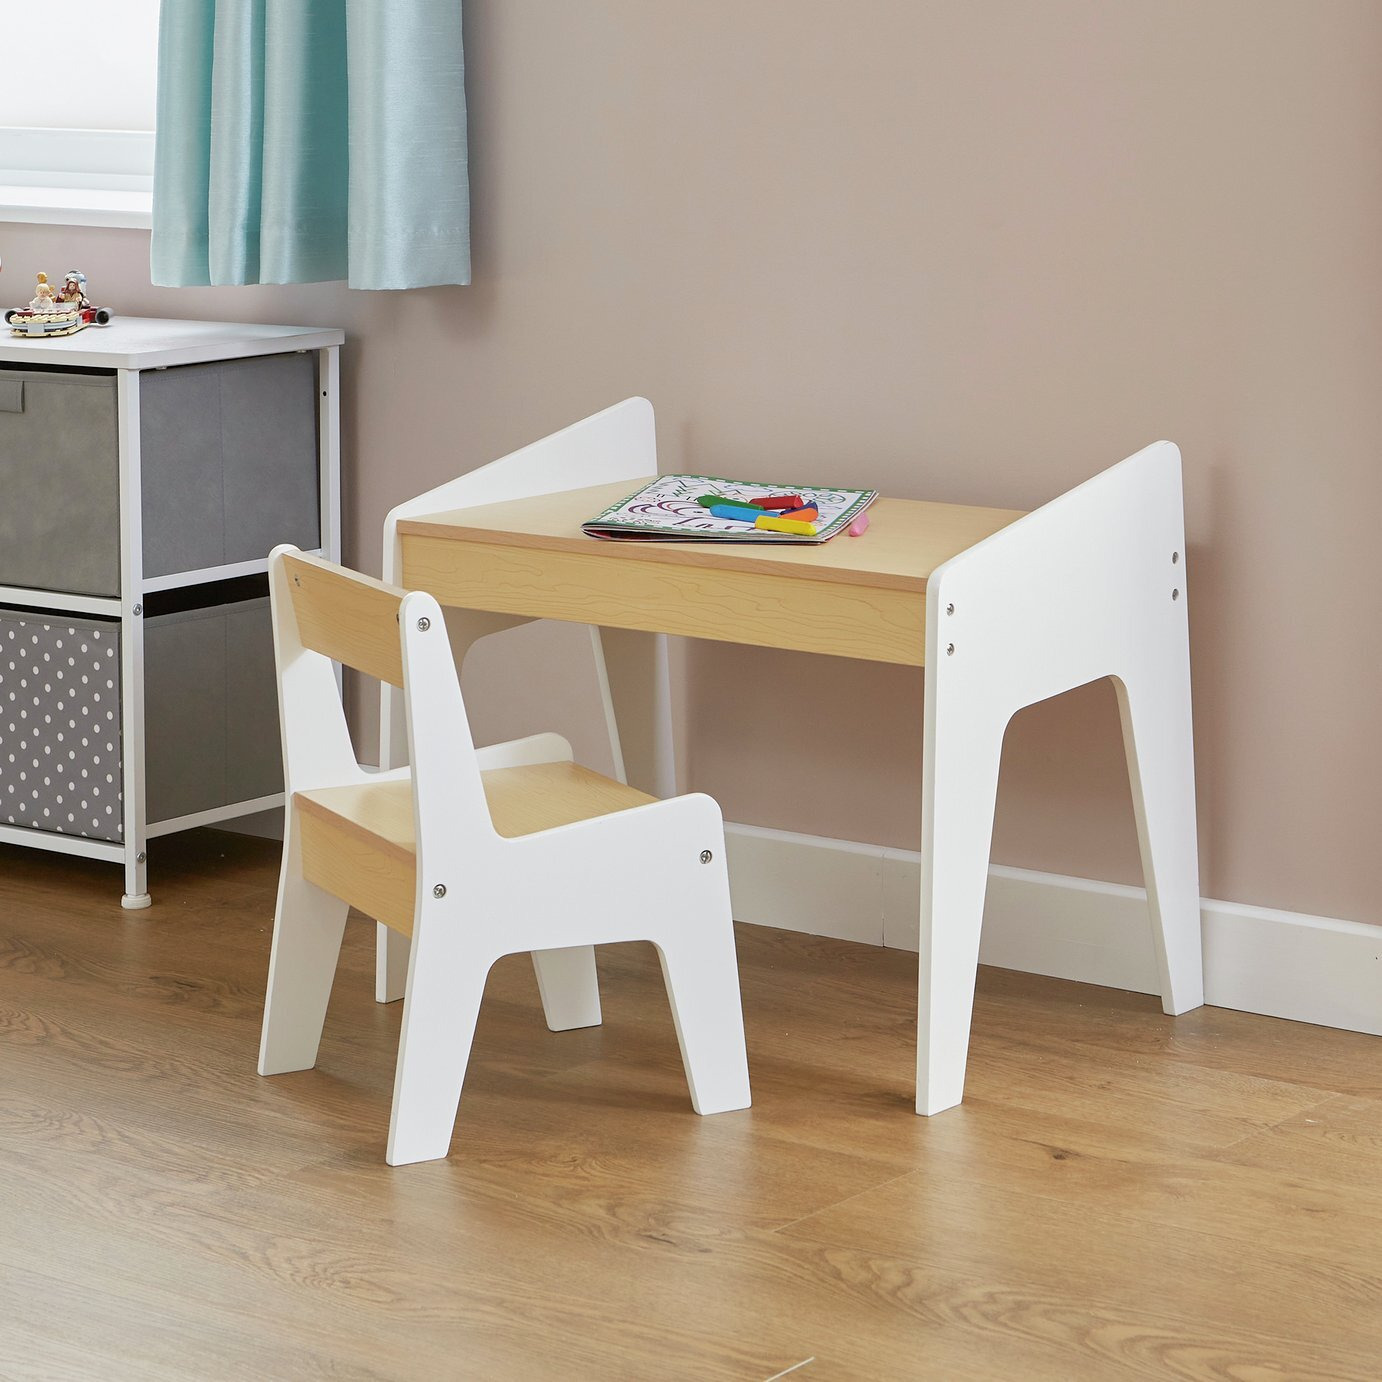 Liberty House Kids Desk And Chair - White Wood - image 1